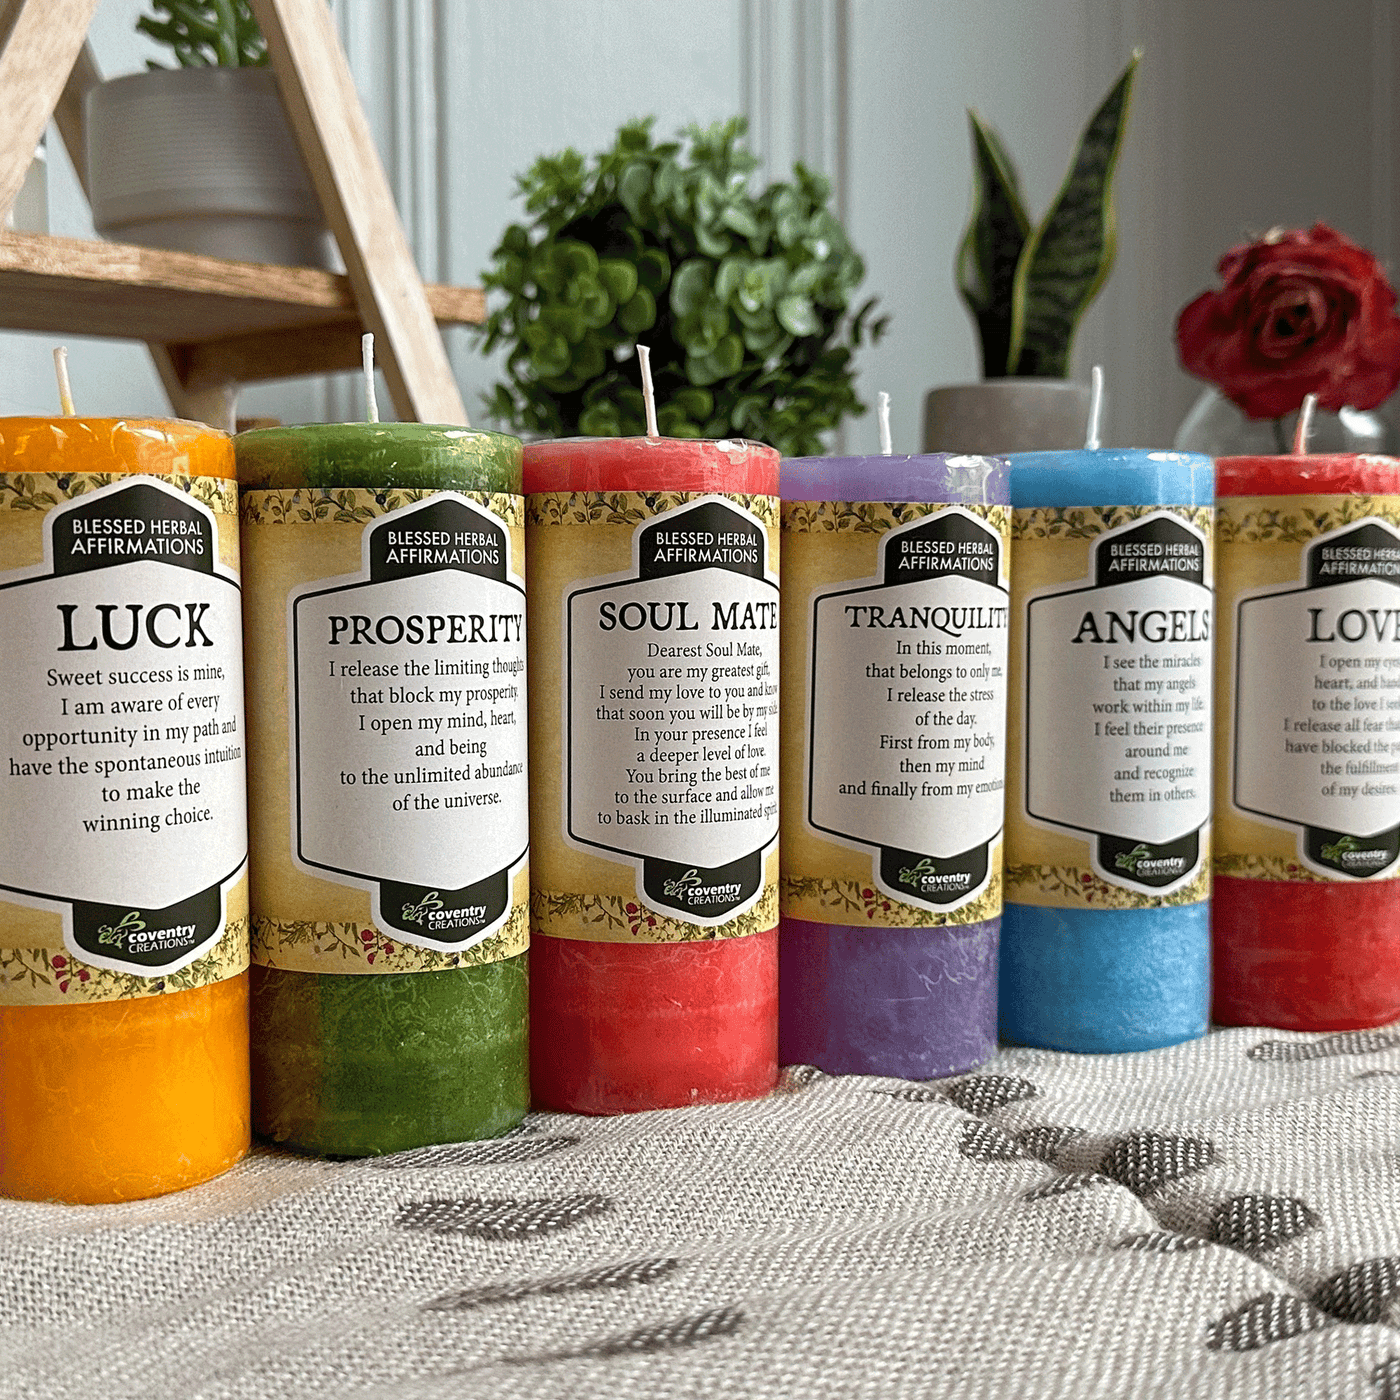 Coventry Creations Affirmation candle restocking set, 6 affirmation candles with flower and plants behind